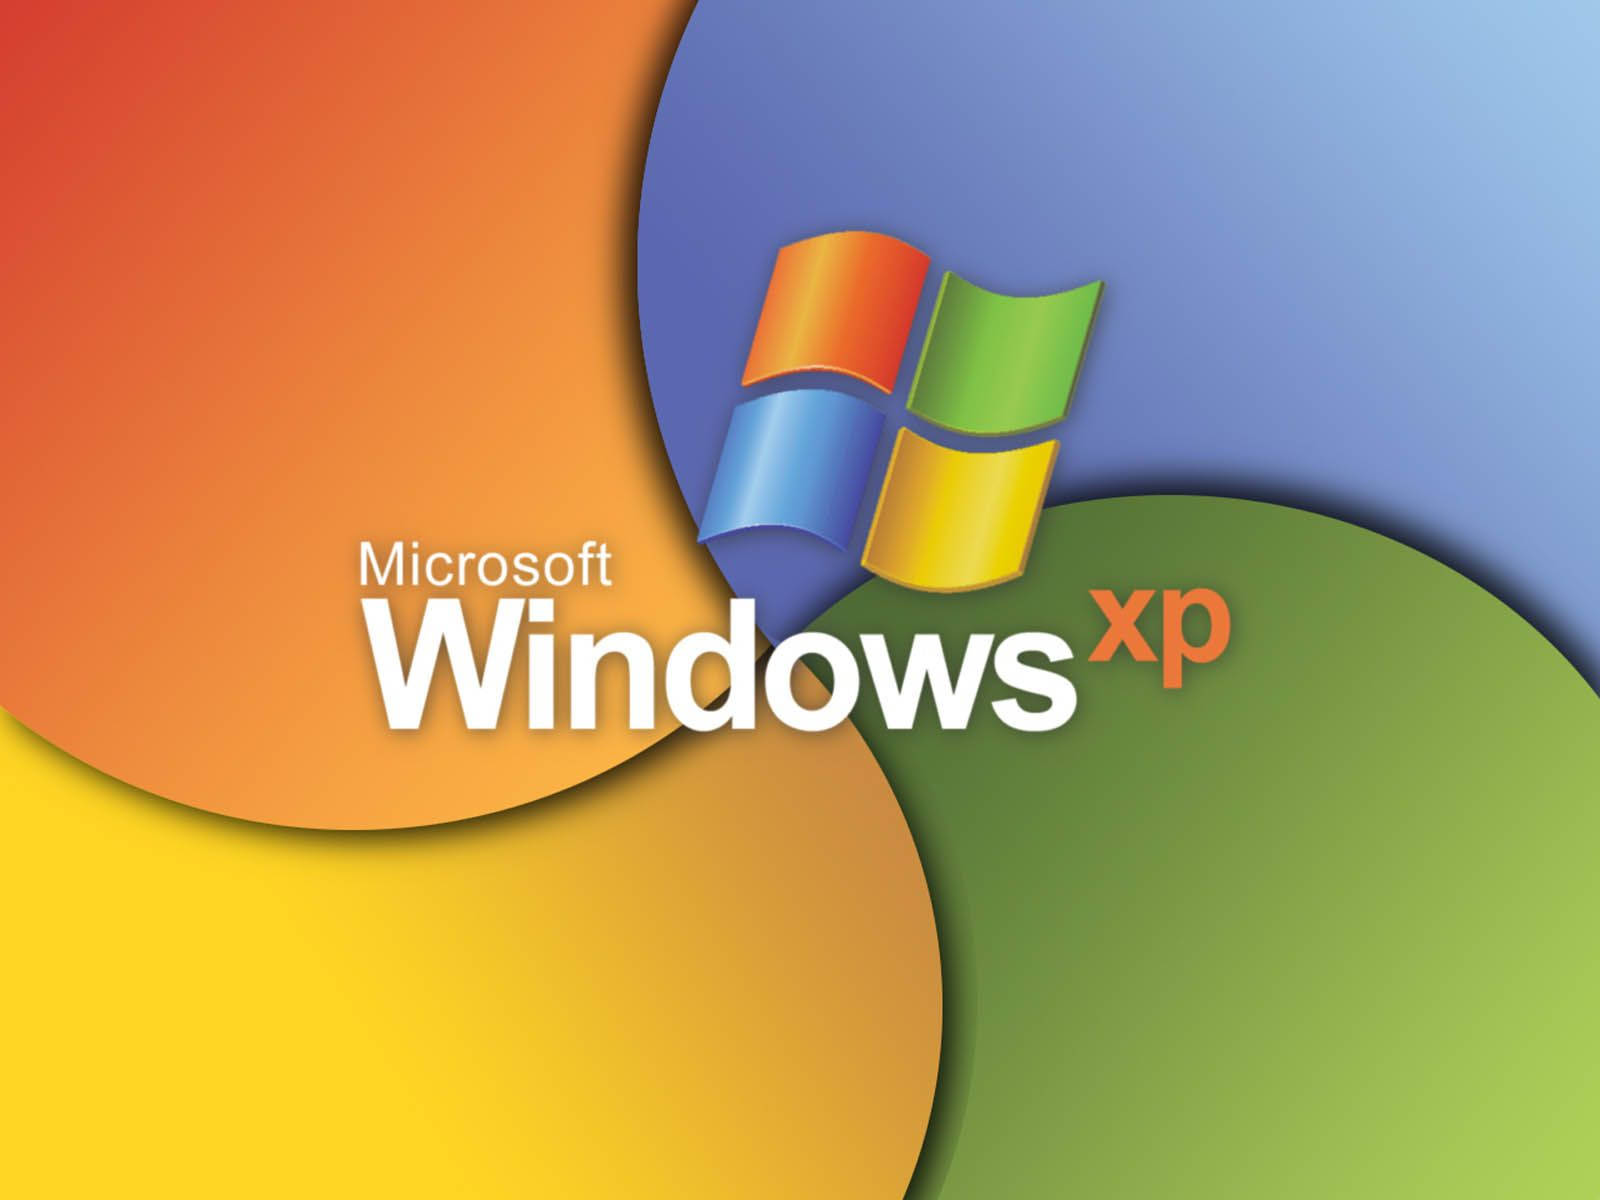 Microsoft Windows Xp Logo With Colorful Circles Background